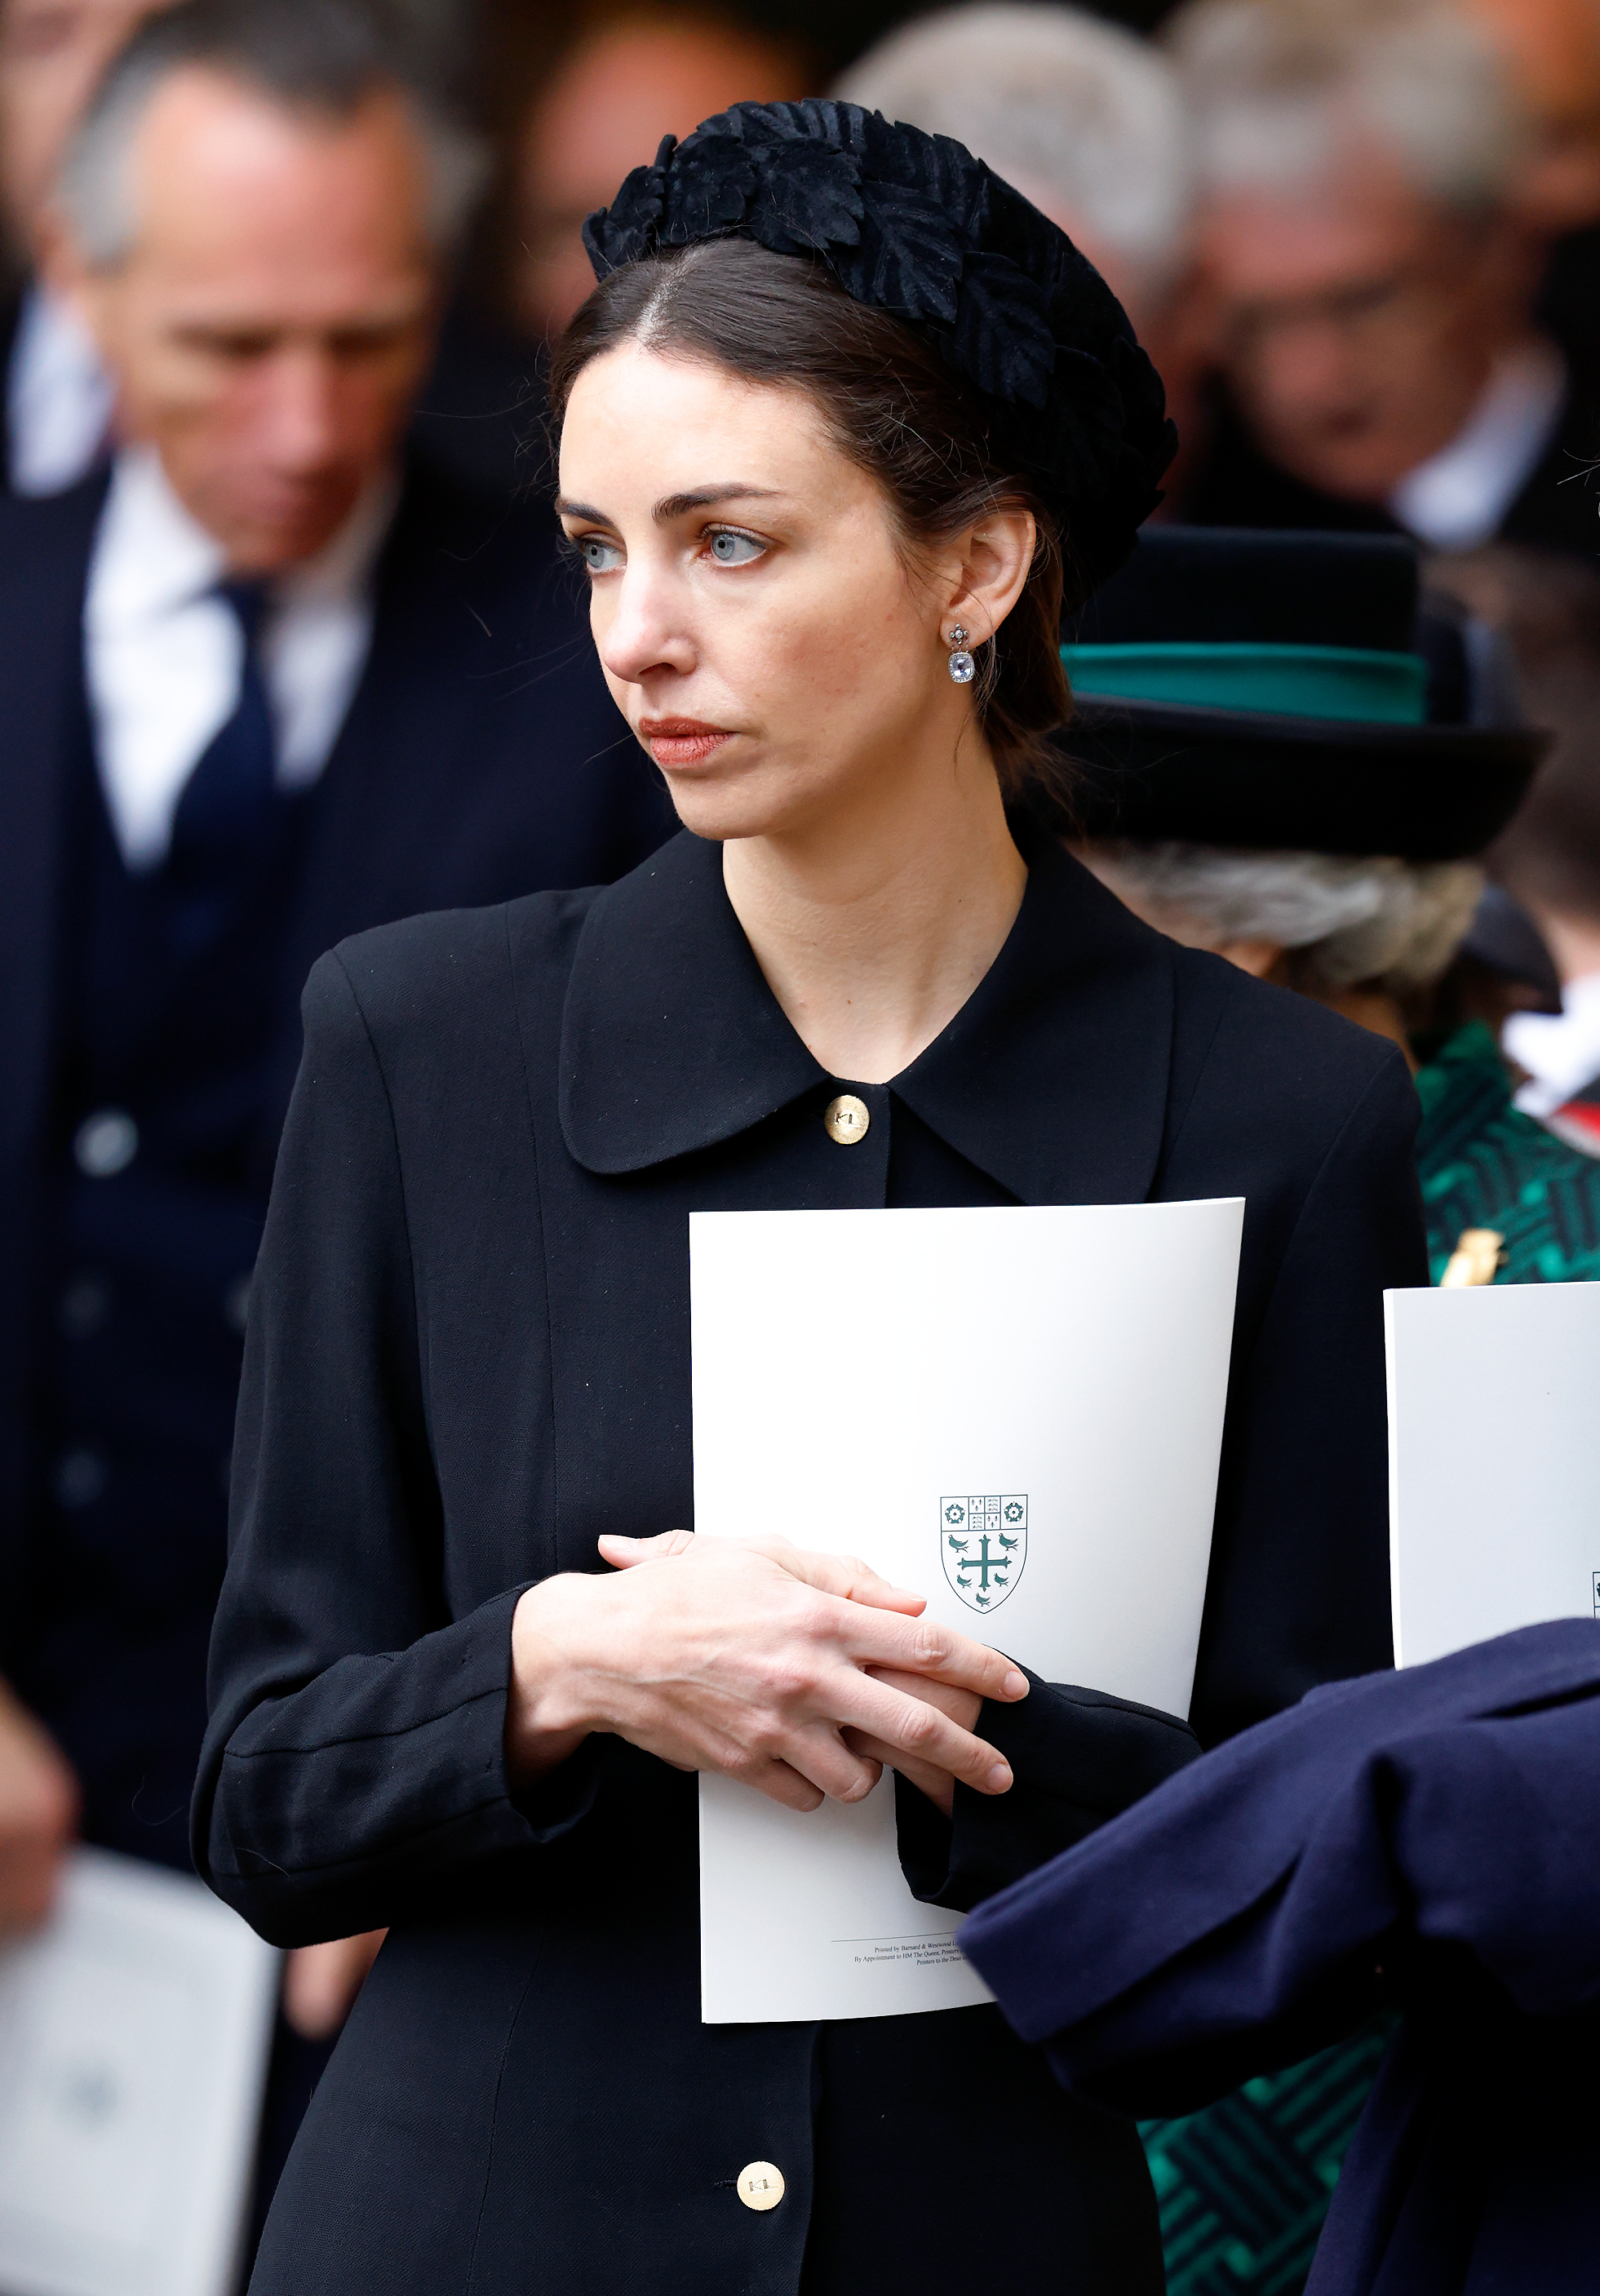 Rose Hanbury, Marchioness of Cholmondeley attends a Service of Thanksgiving for the life of Prince Philip, Duke of Edinburgh at Westminster Abbey in London, England, on March 29, 2022. | Source: Getty Images